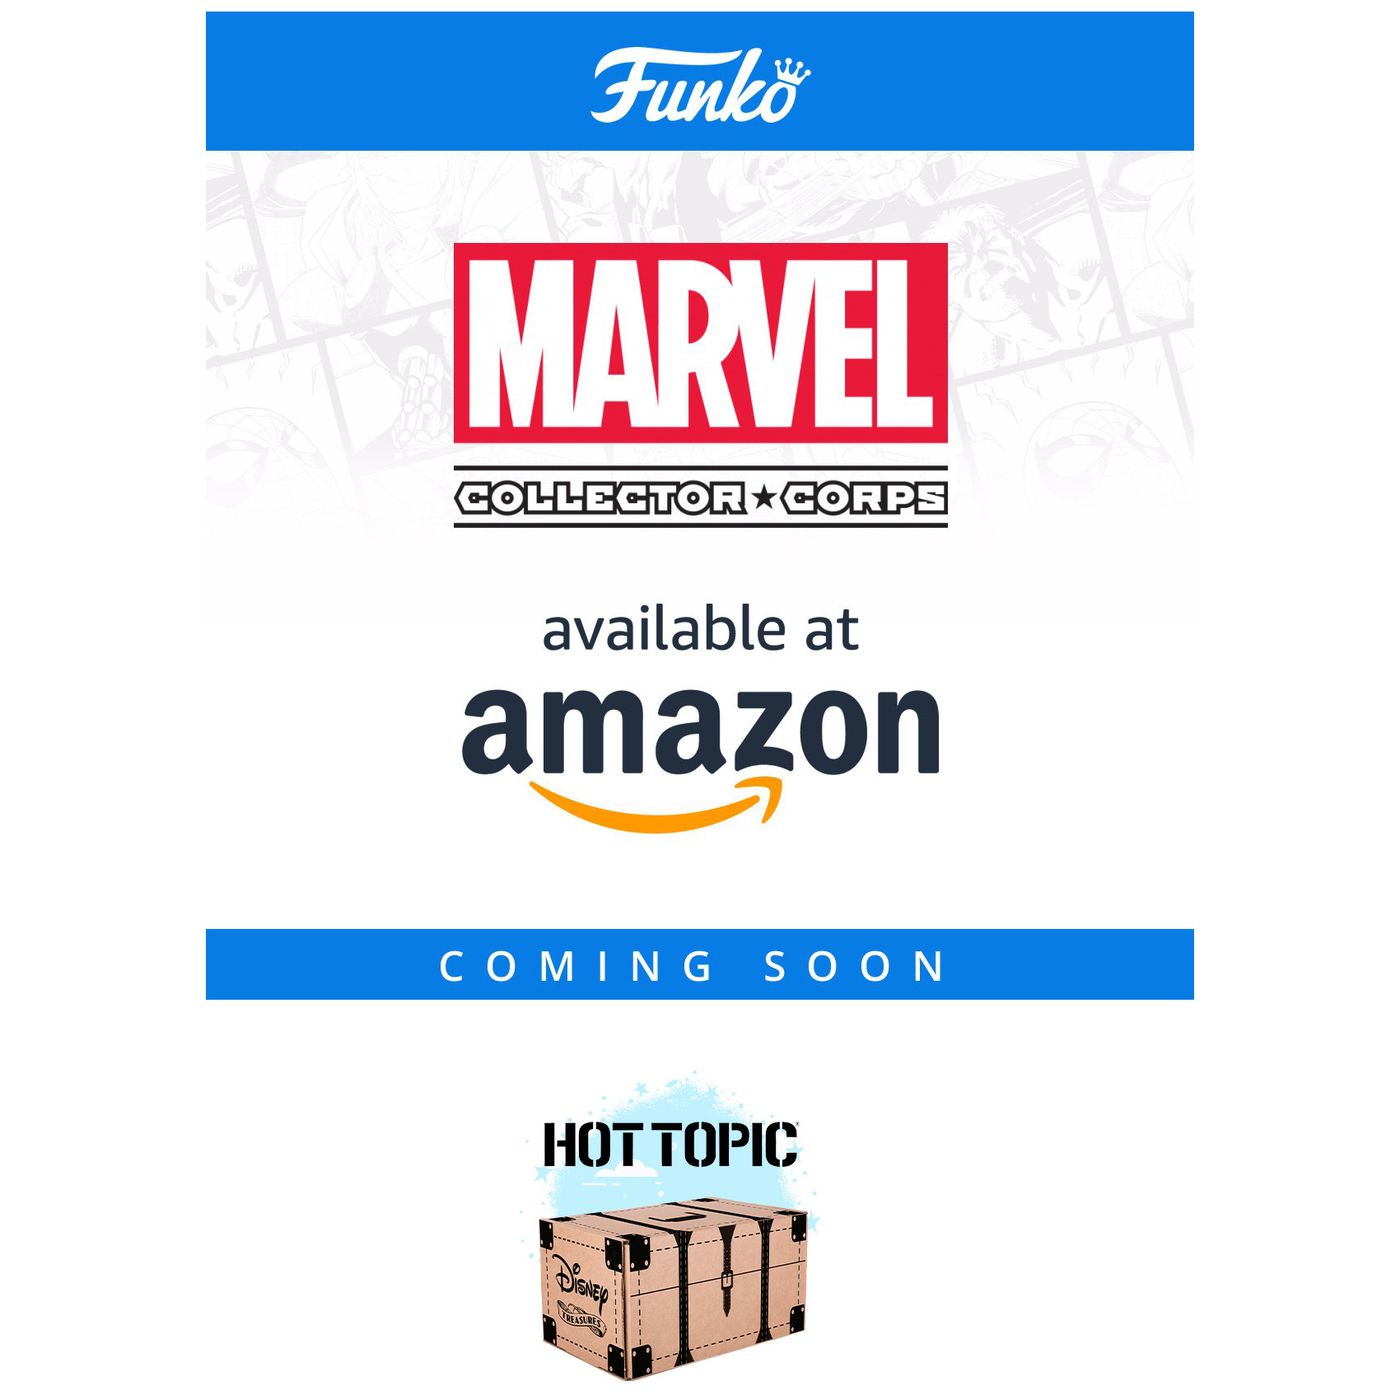 Marvel Collector Corps & Disney Treasures Are Coming Back This Summer!